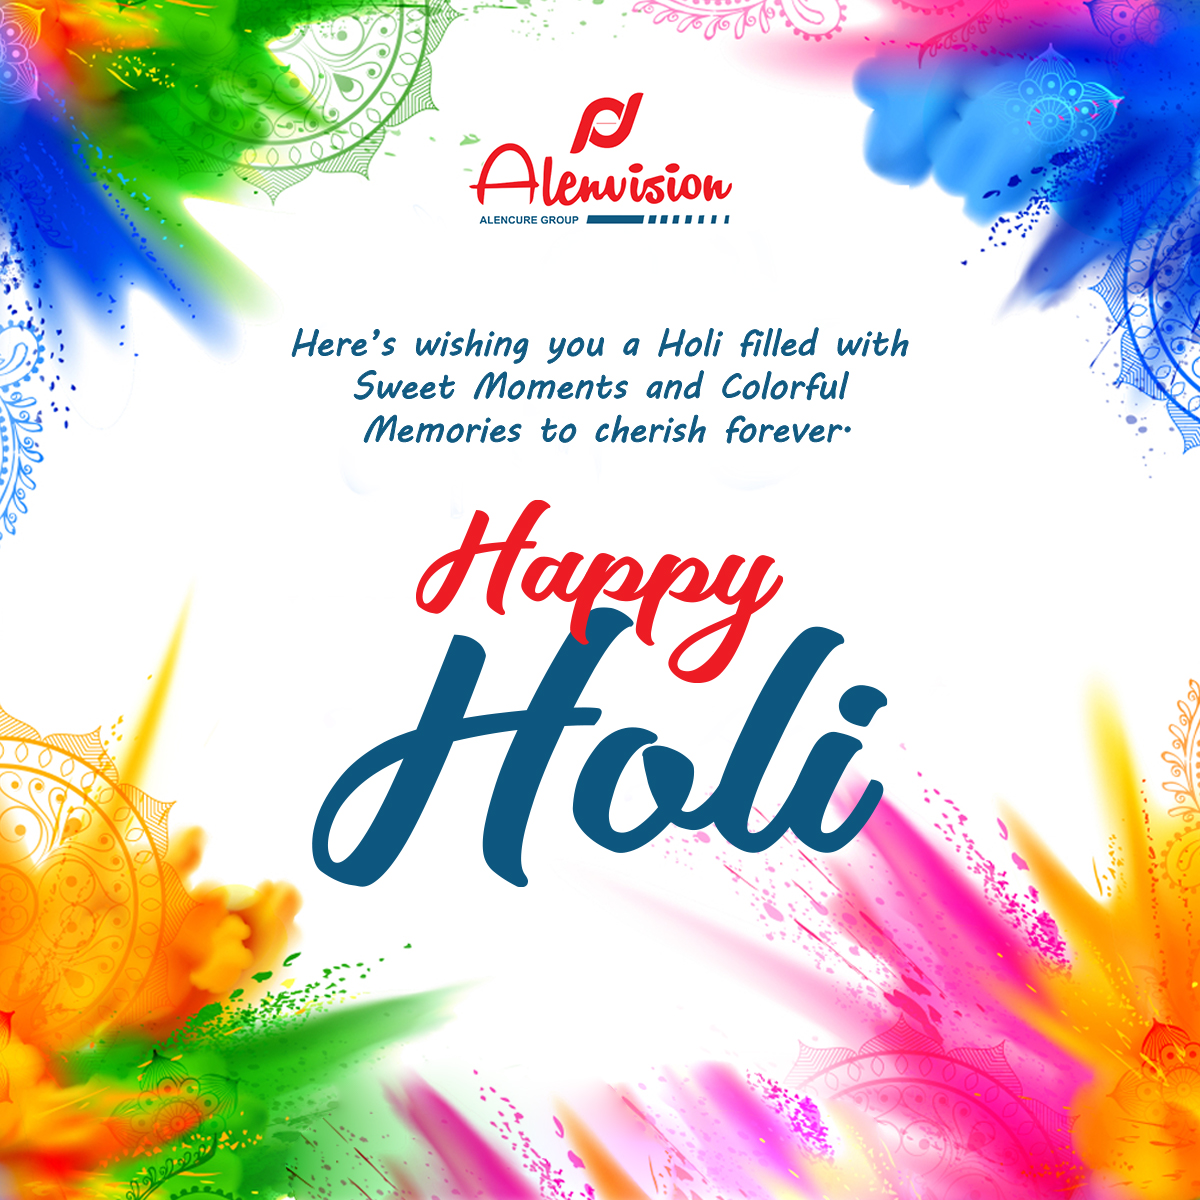 Here’s wishing you a #Holi filled with #SweetMoments and #ColorfulMemories to cherish forever.
#HappyHoli!